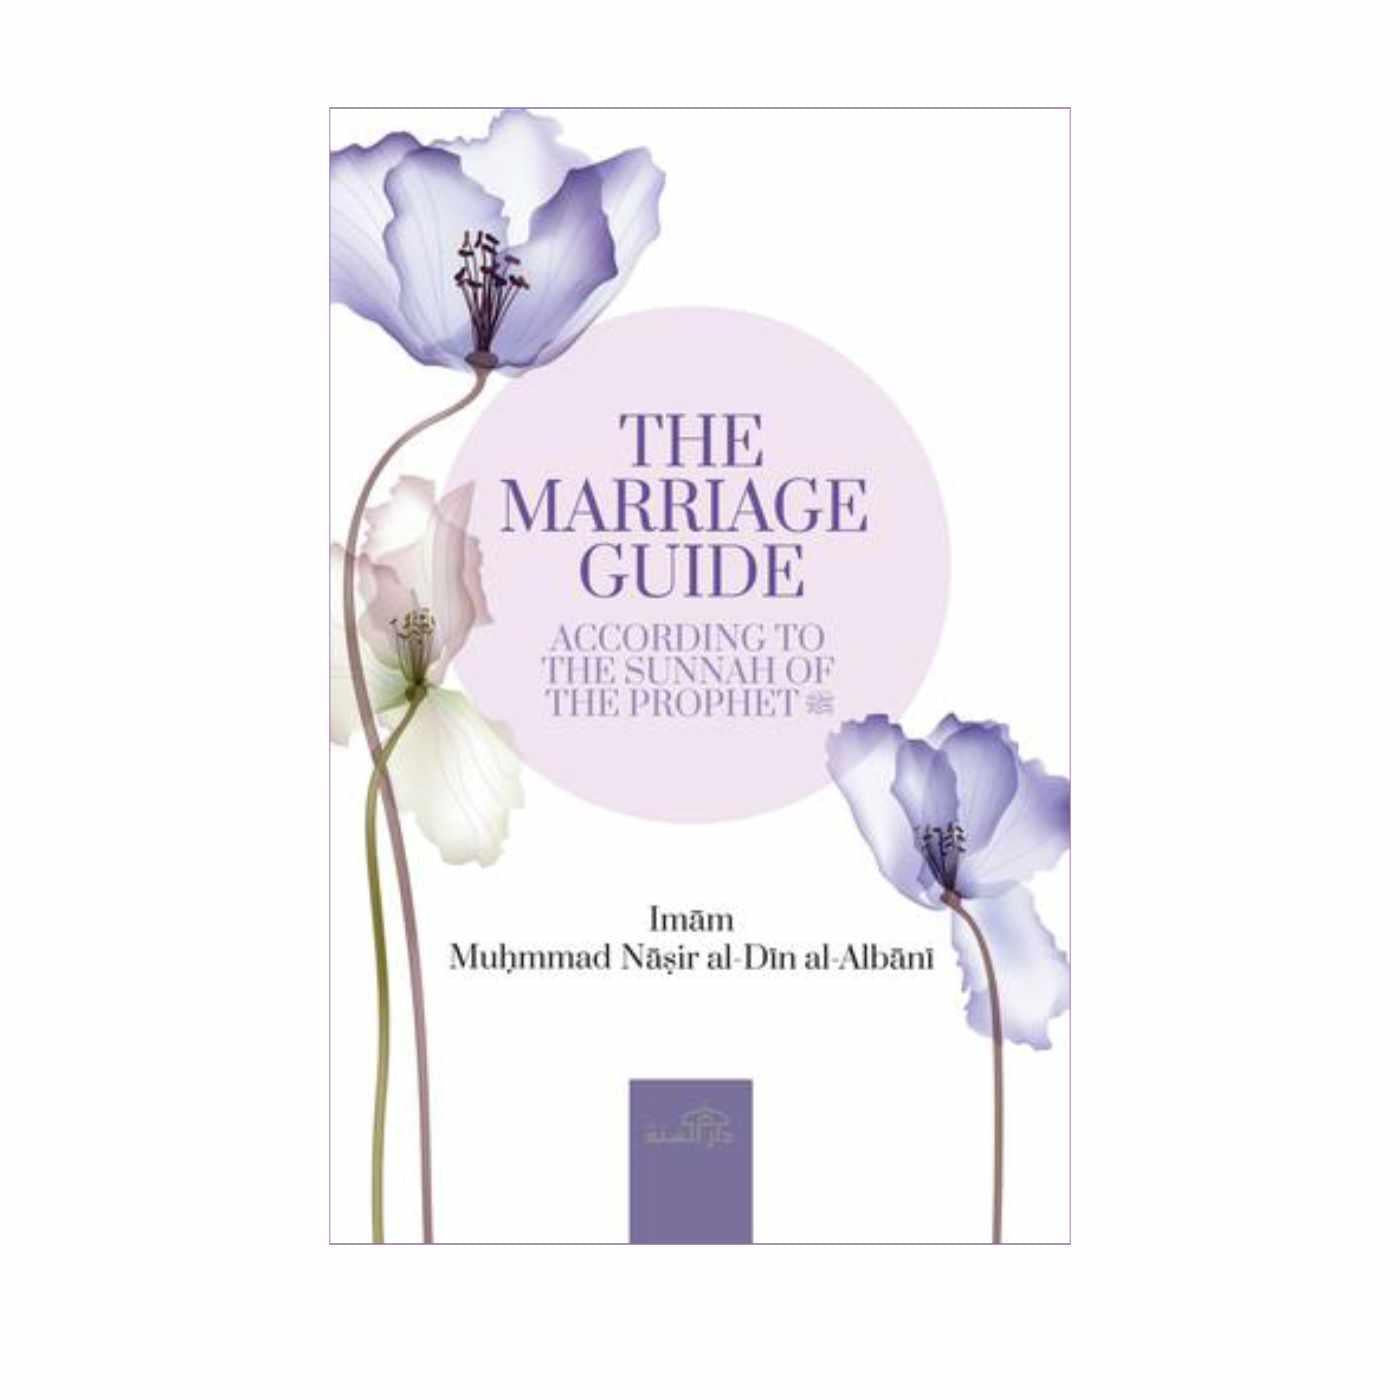 The Marriage Guide According To The Sunnah Of The Prophet